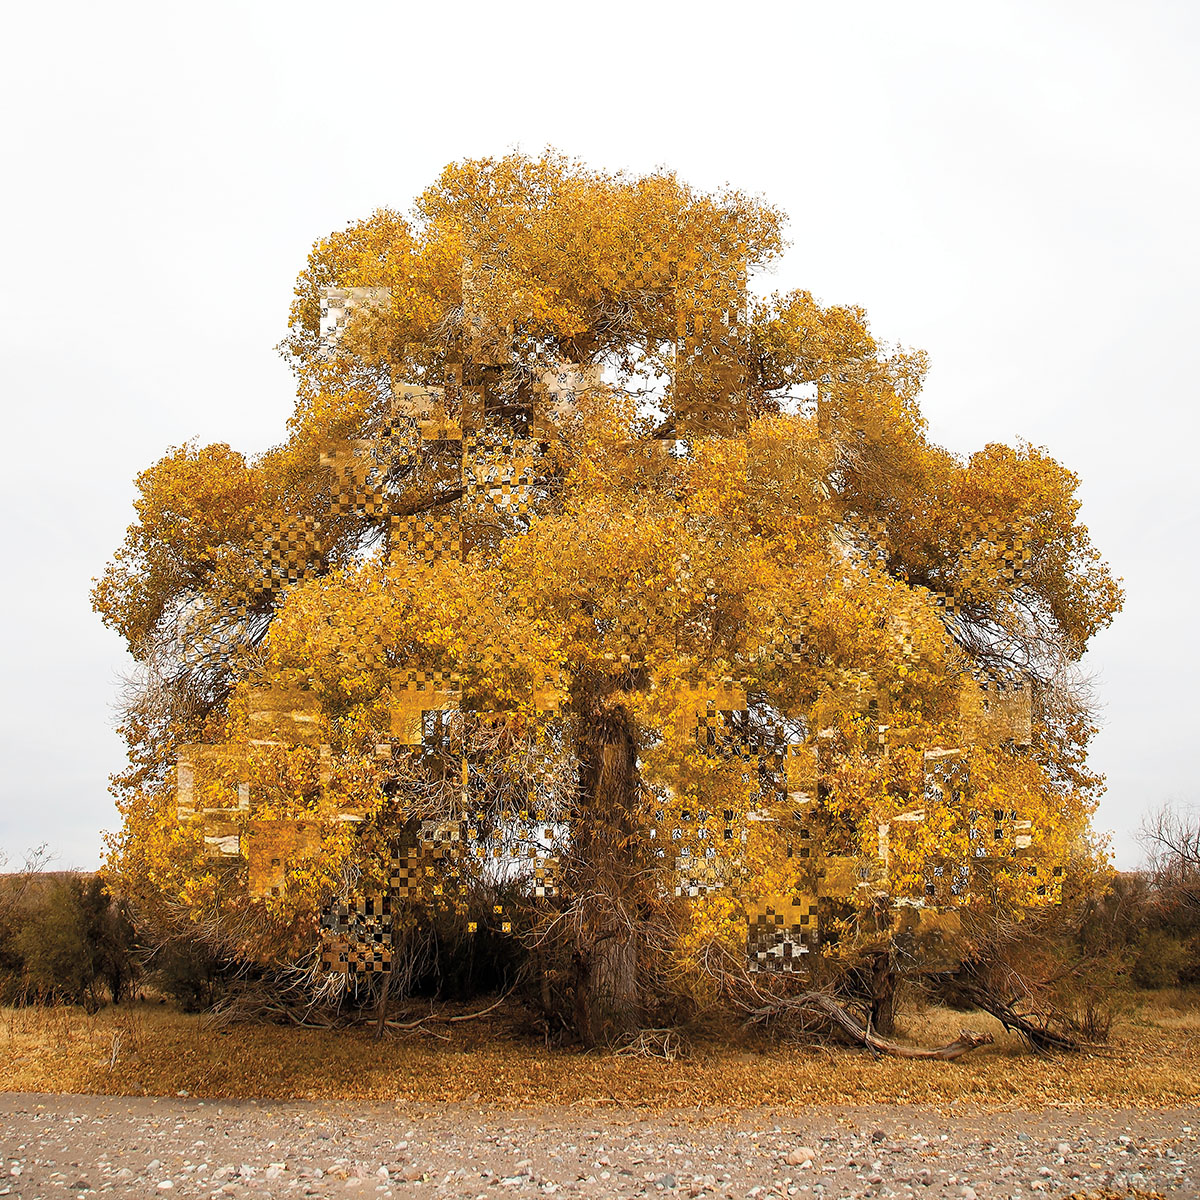 A composite, slightly altered image of an orange cottonwood with leaves below